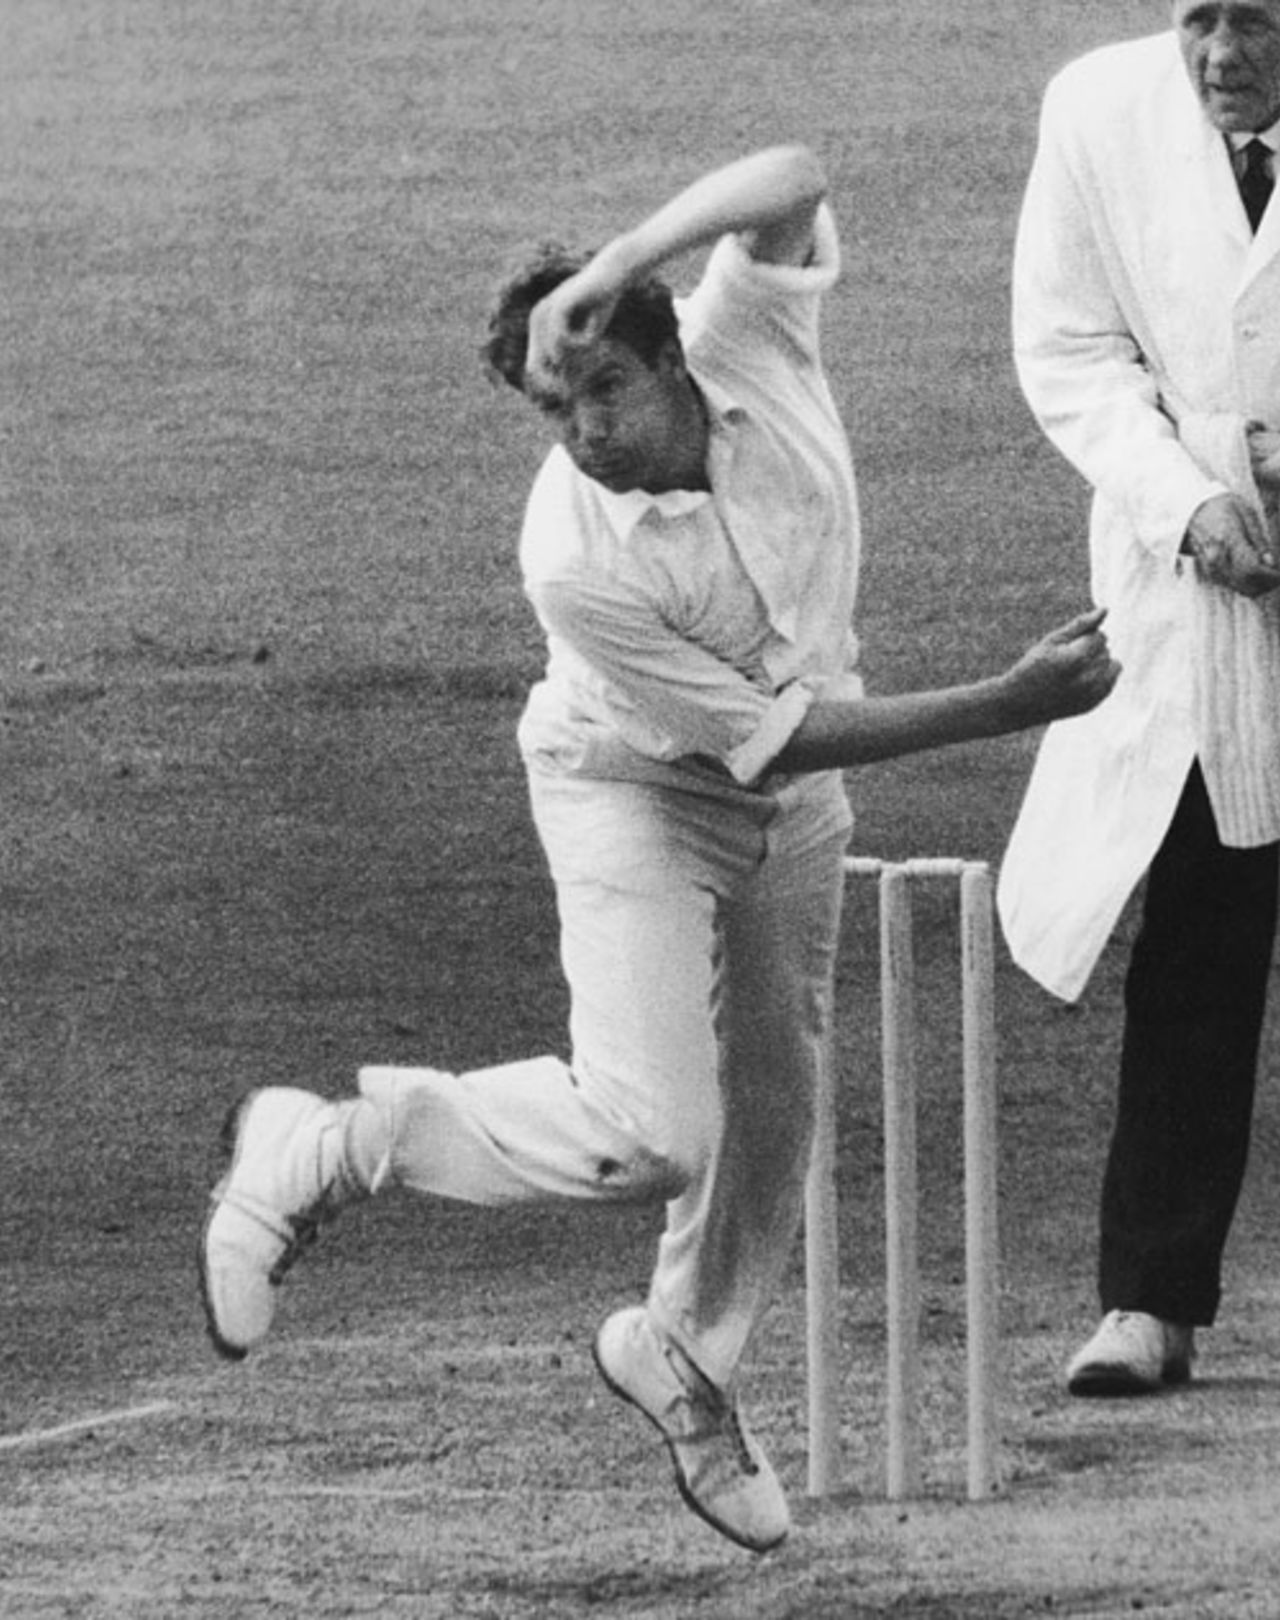 Dusty Rhodes bowls during his four-wicket haul, Surrey v Derbyshire, County Championship, The Oval, 2nd day, May 9, 1966